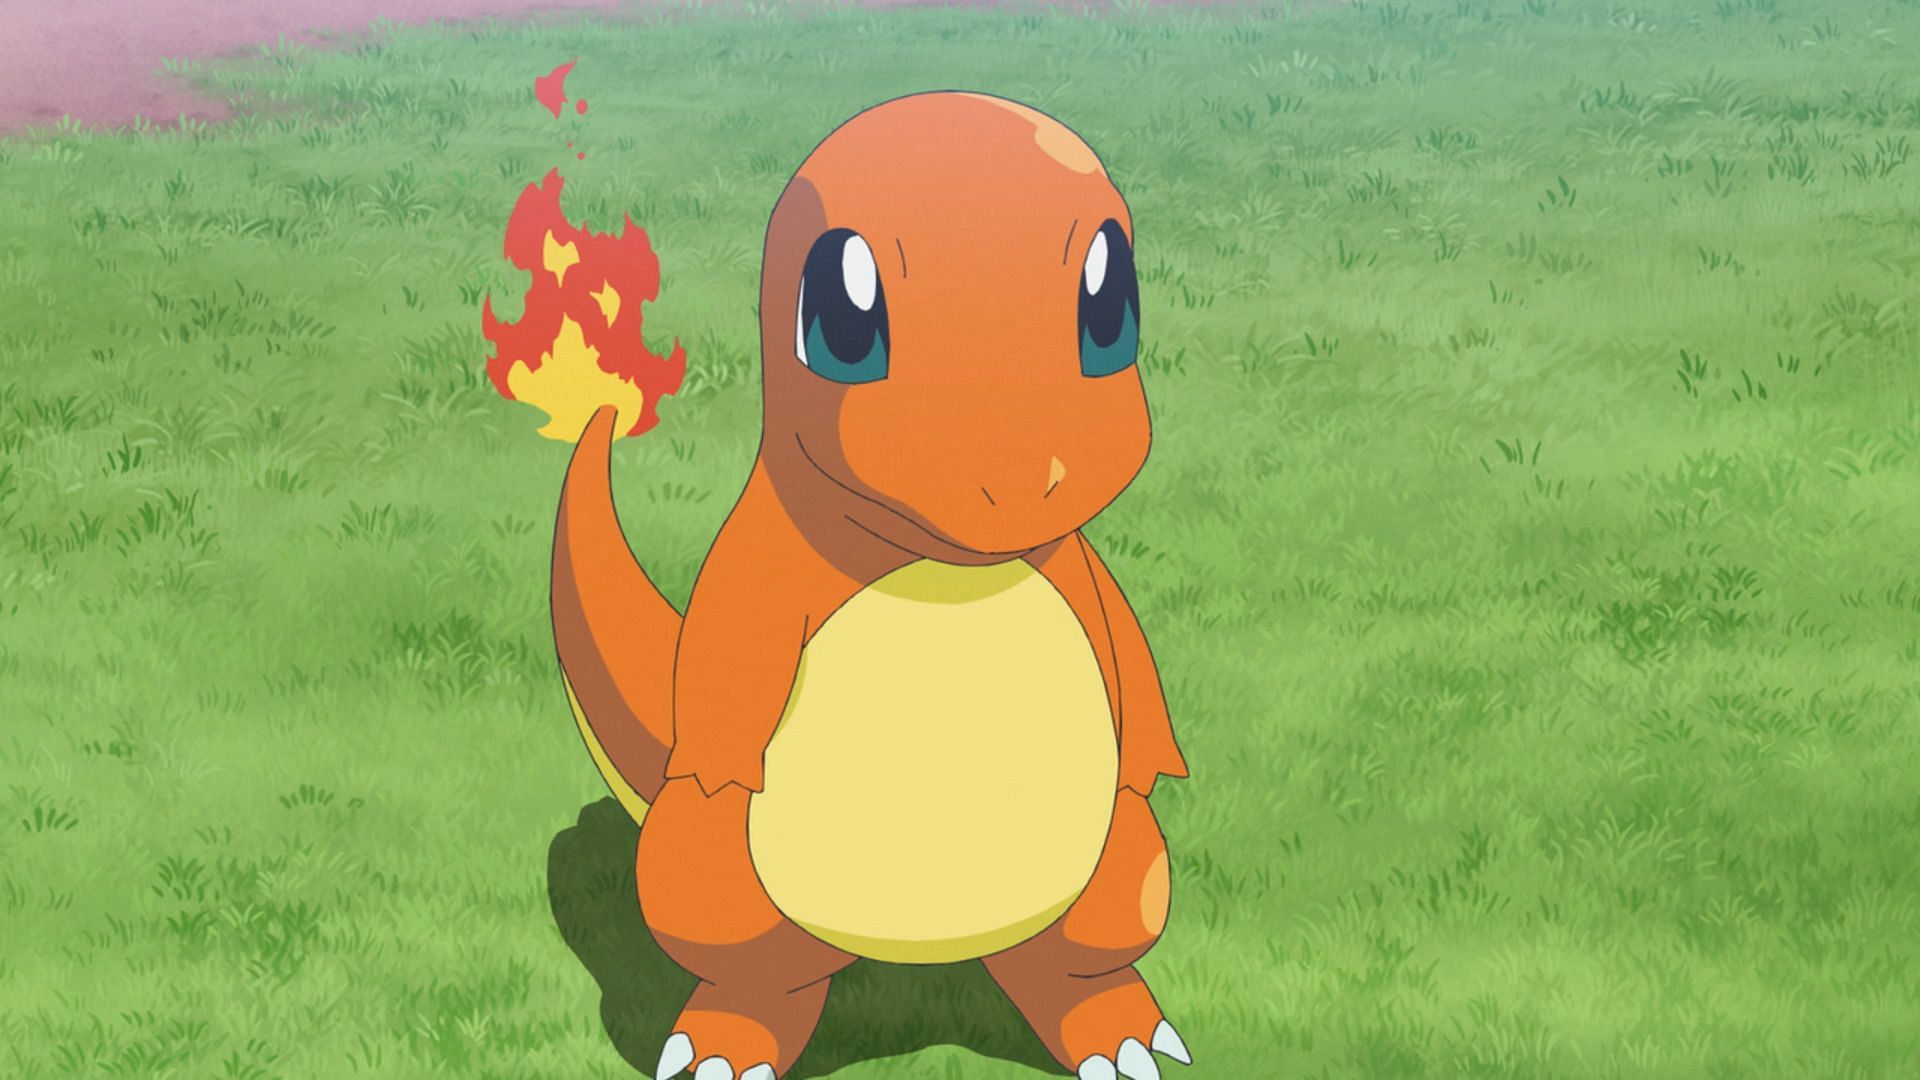 Charmander as seen in the anime